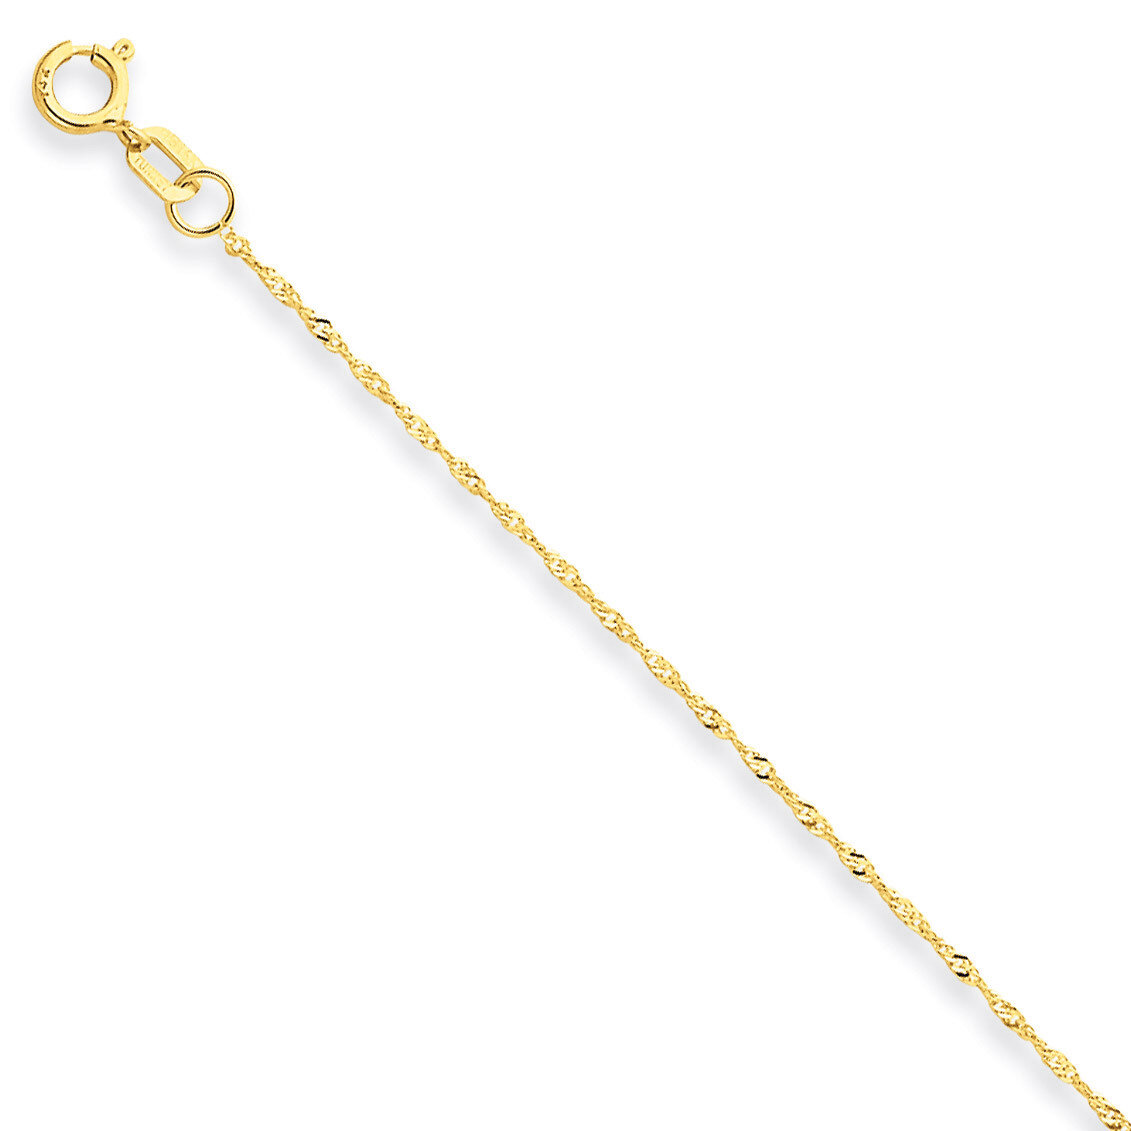 1mm Singapore Chain (CARDED) 18 Inch 14k Gold 10SY-18